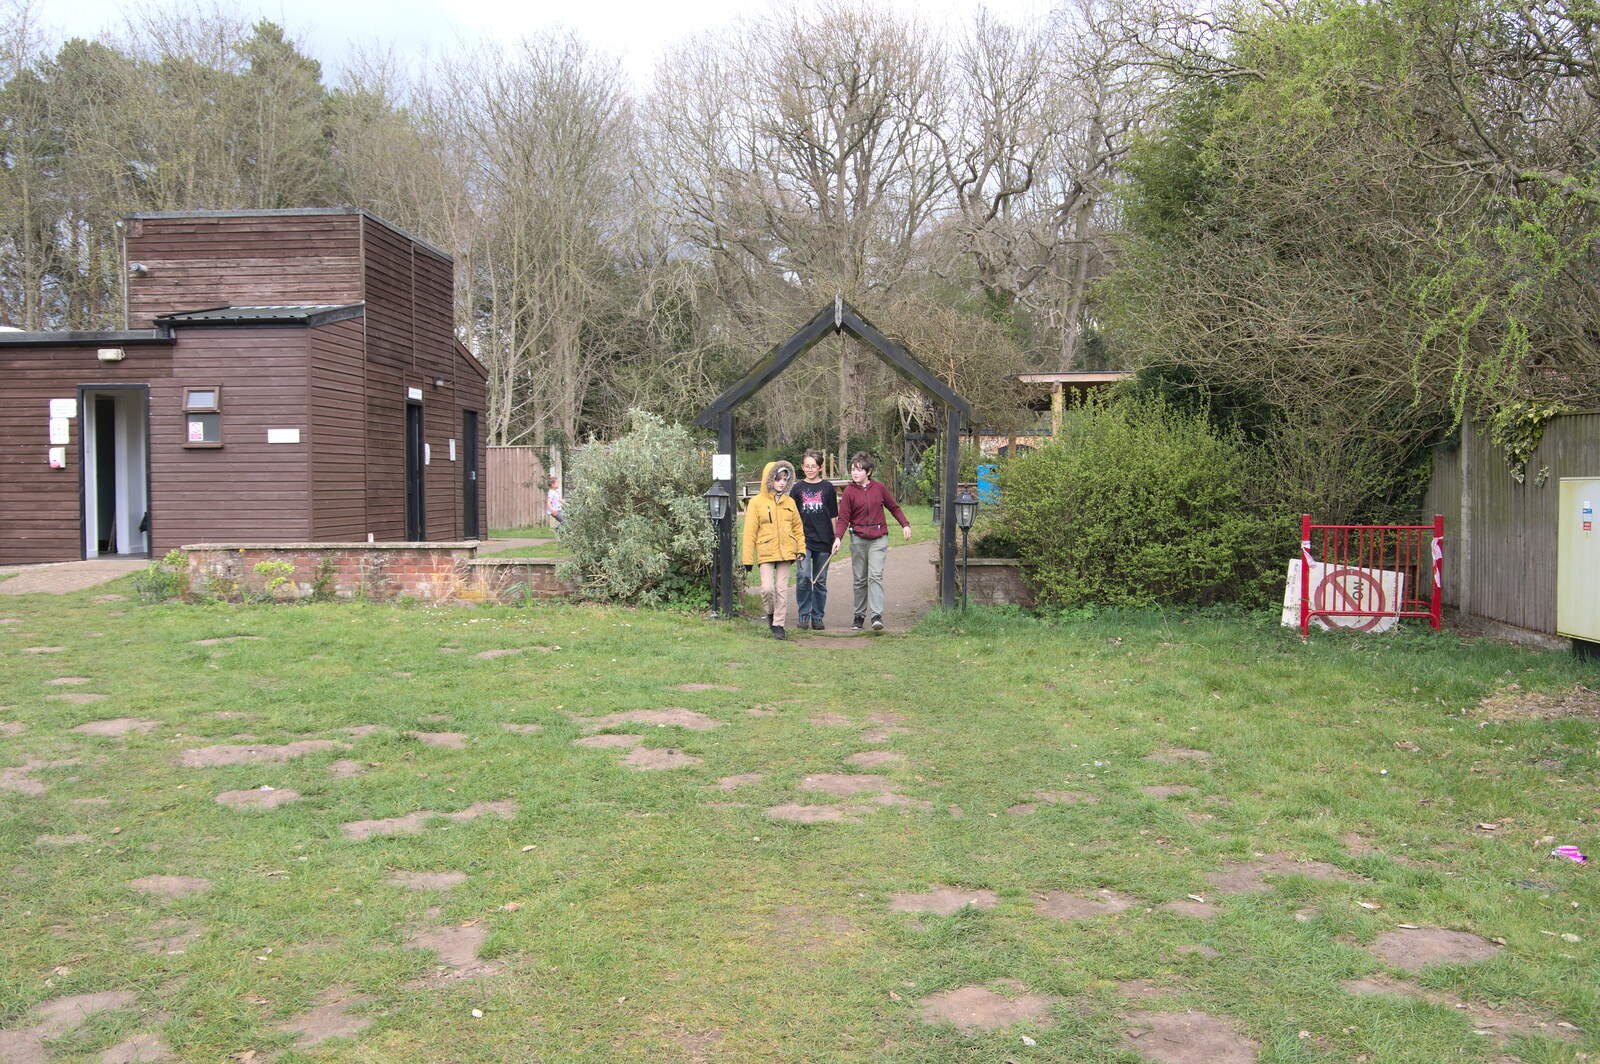 A Camper-Van Trip, West Harling, Norfolk - 13th April 2022: The boys back at Dower House campsite